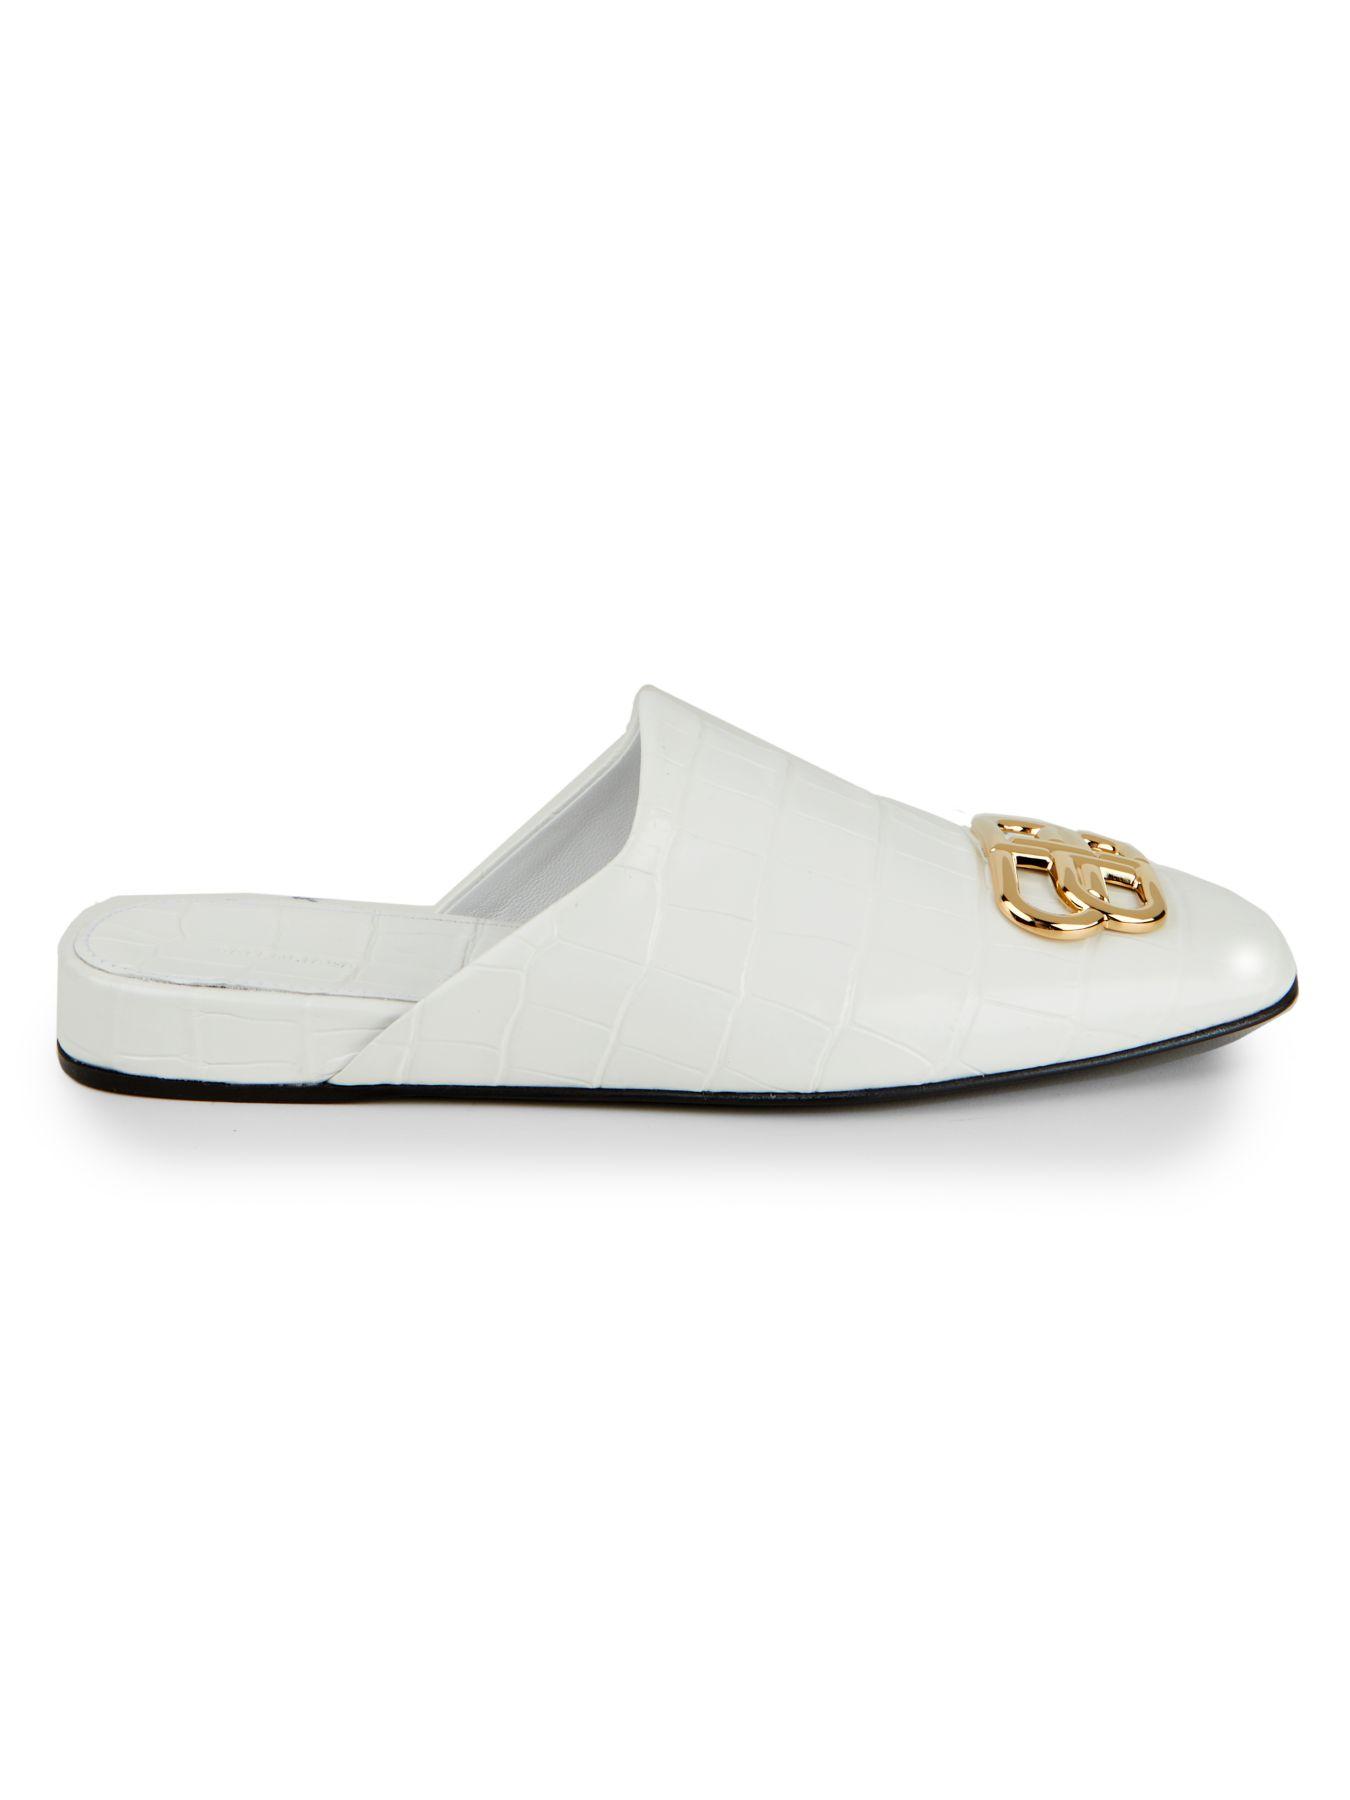 Balenciaga Cosy Bb Croc-embossed Leather Mules in White Gold (White) - Lyst